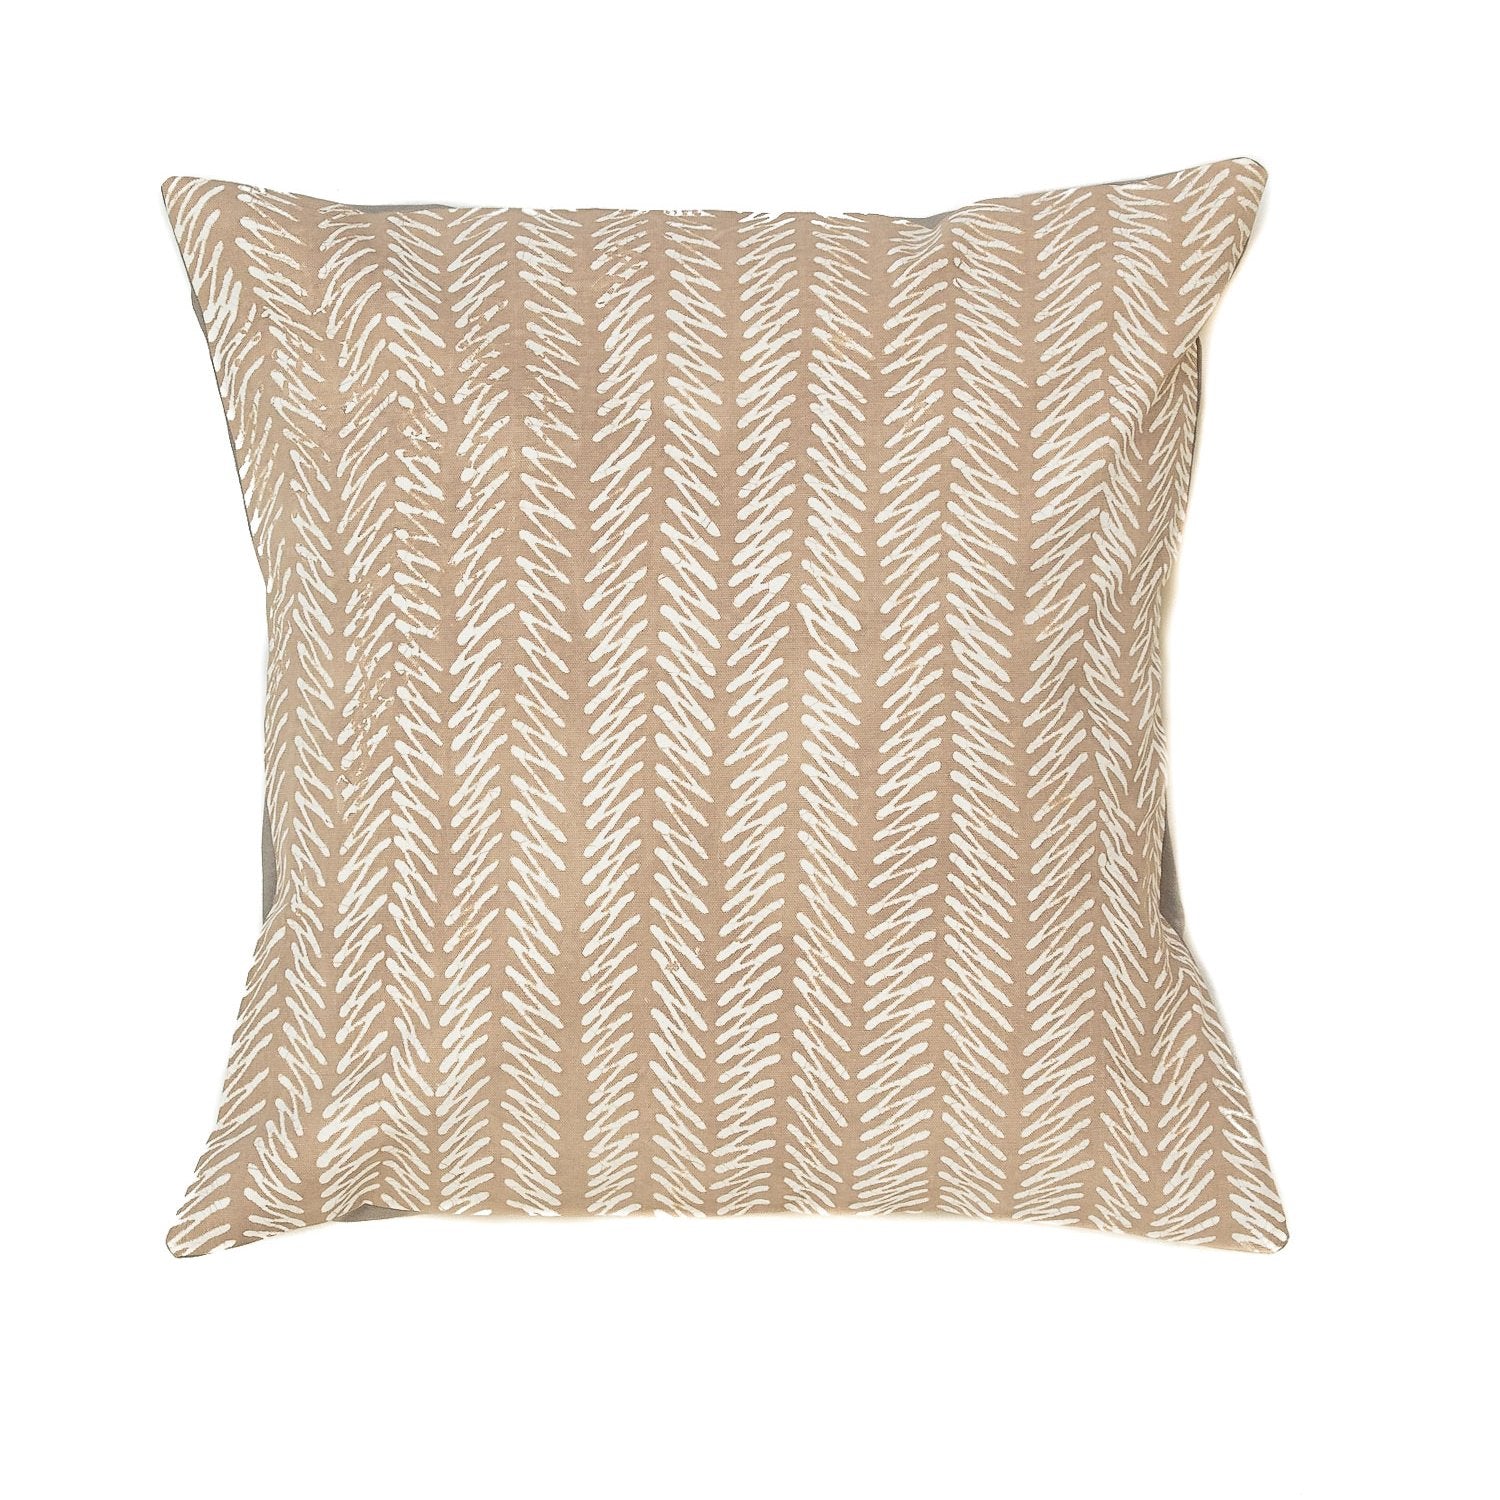 The perfect neutral cushion cover in beige adorned with an elegant squiggle pattern.